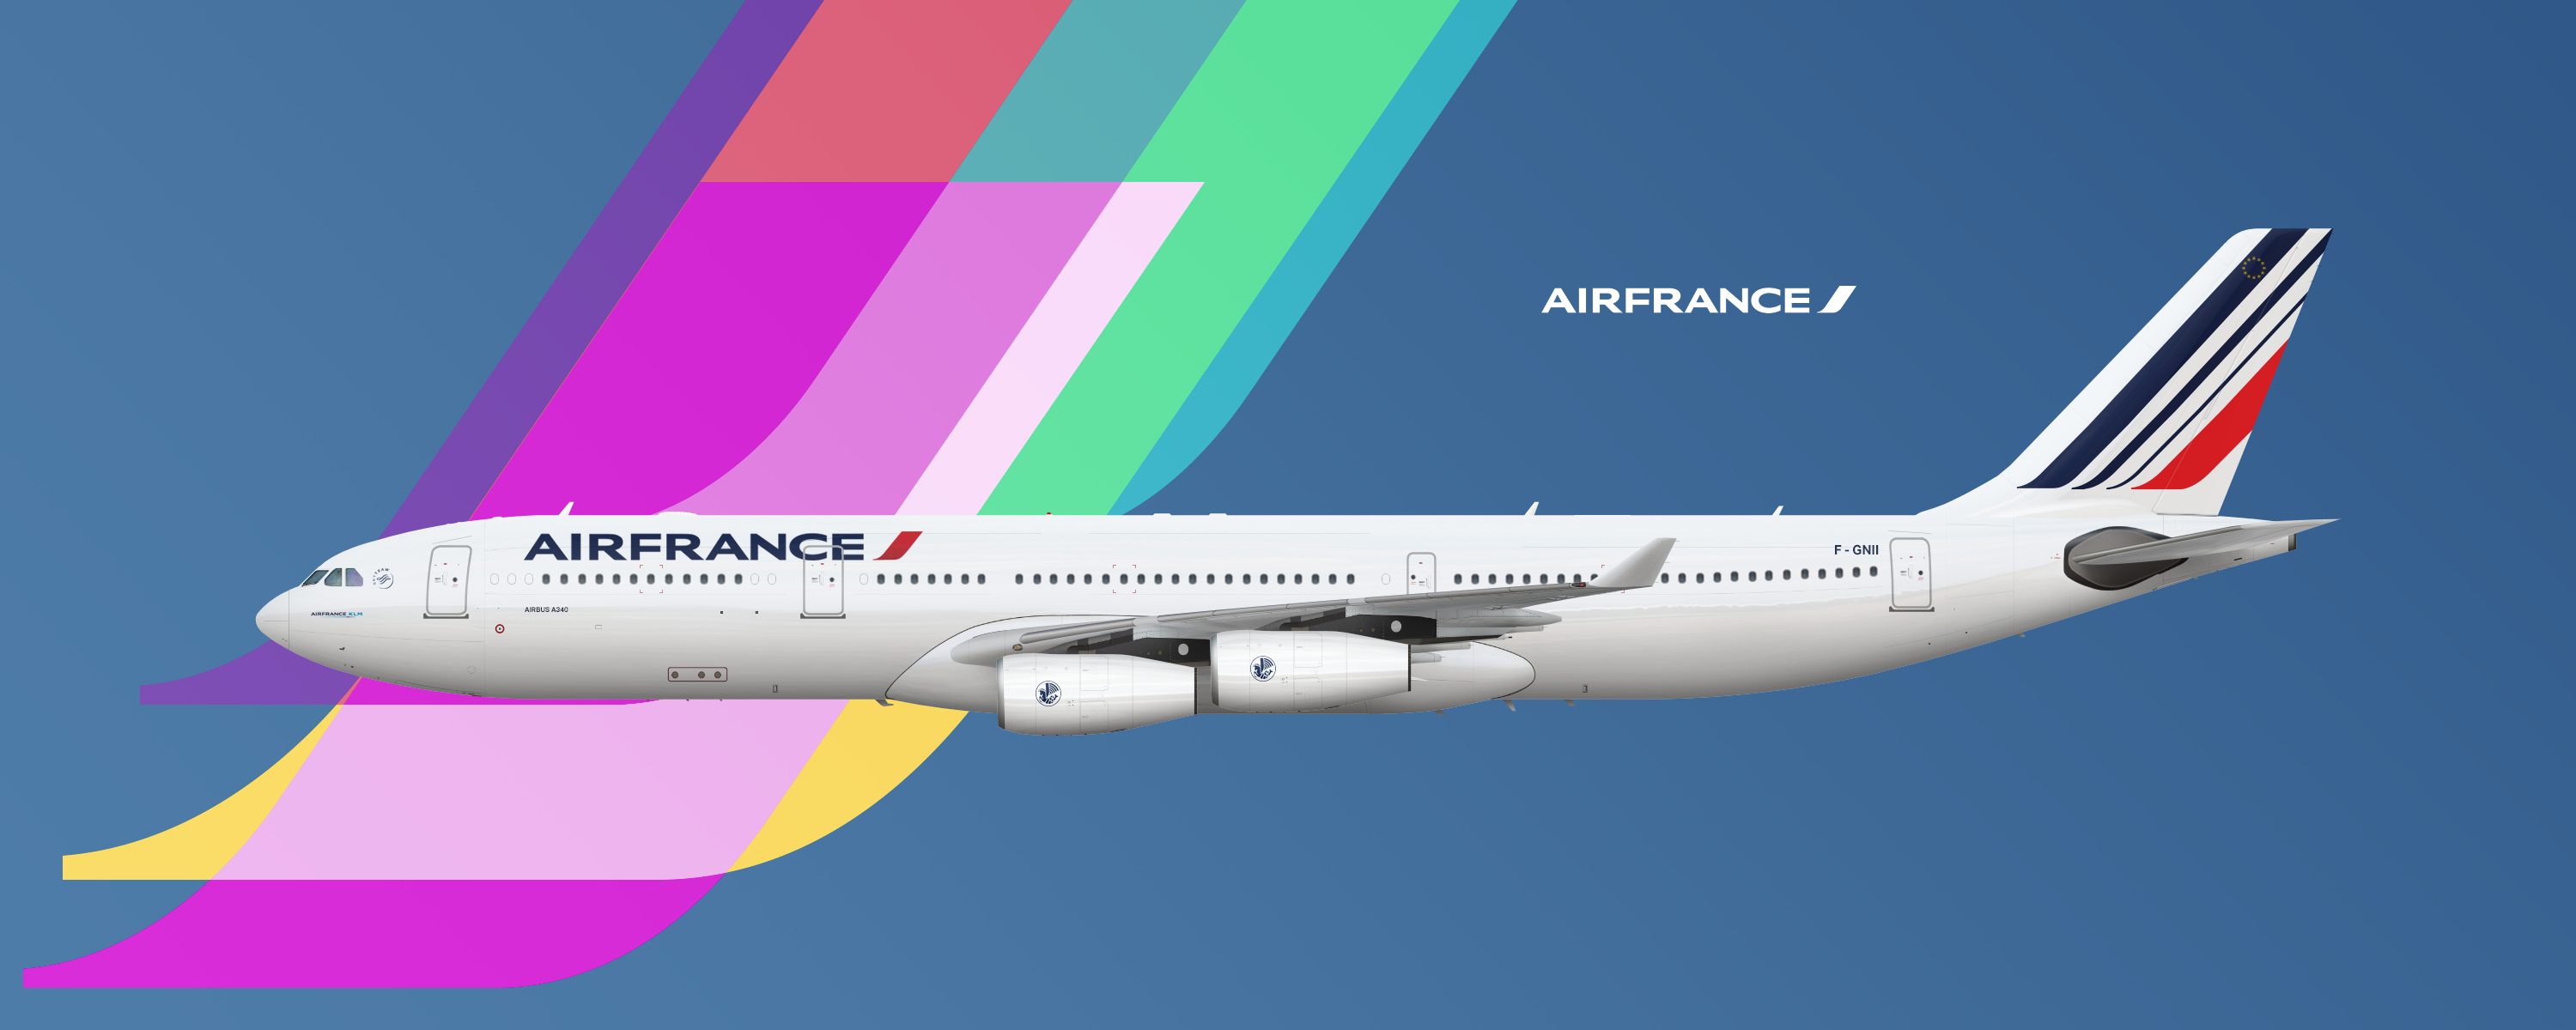 Air France A340 - Brand By Agre - Gallery - Airline Empires